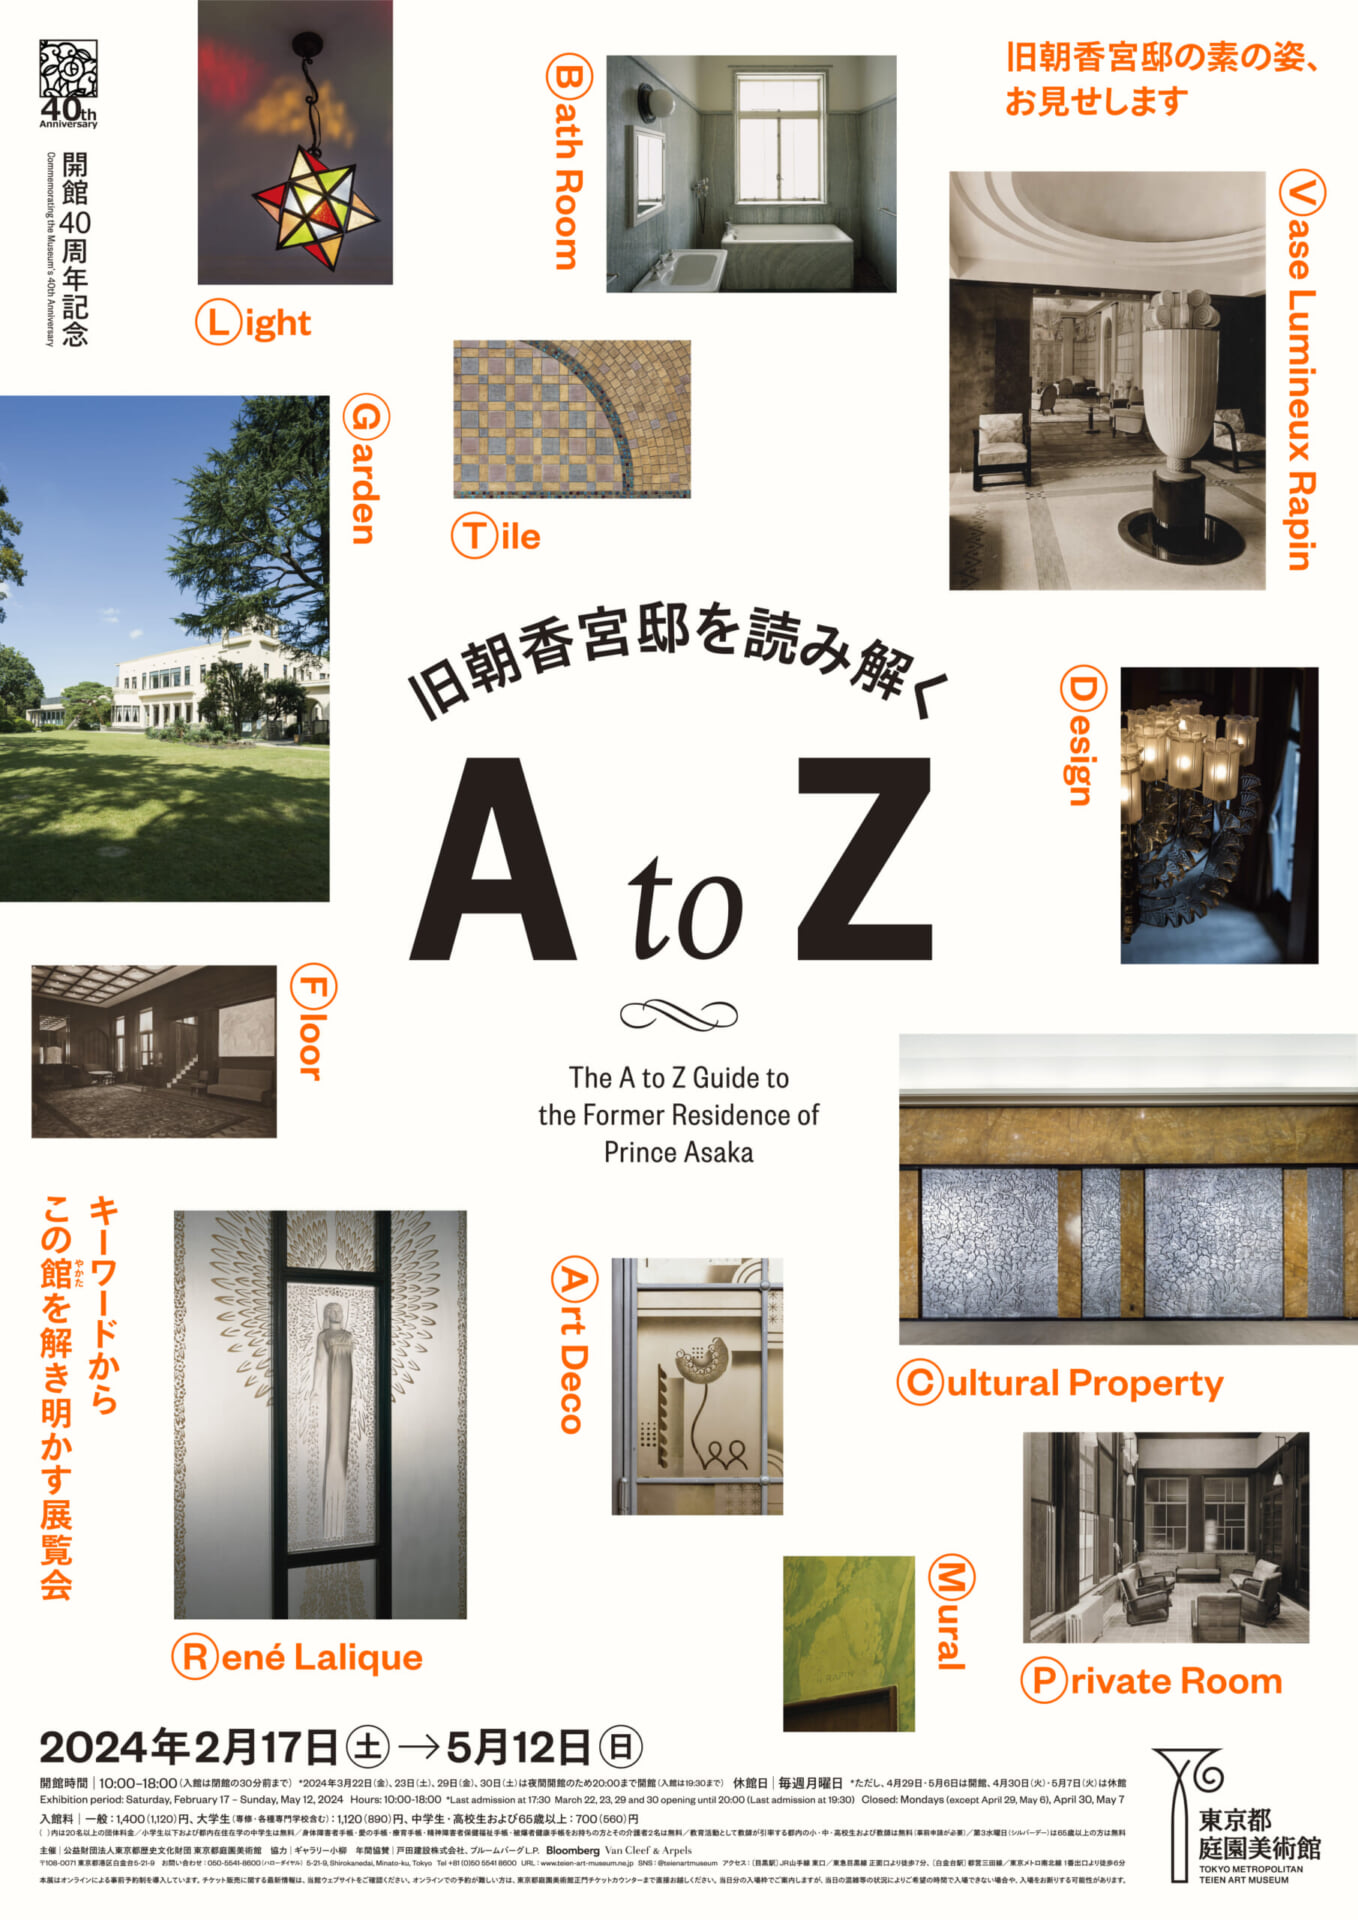 Commemorating the Museum’s 40th Anniversary The A to Z Guide to the Former Residence of Prince Asaka